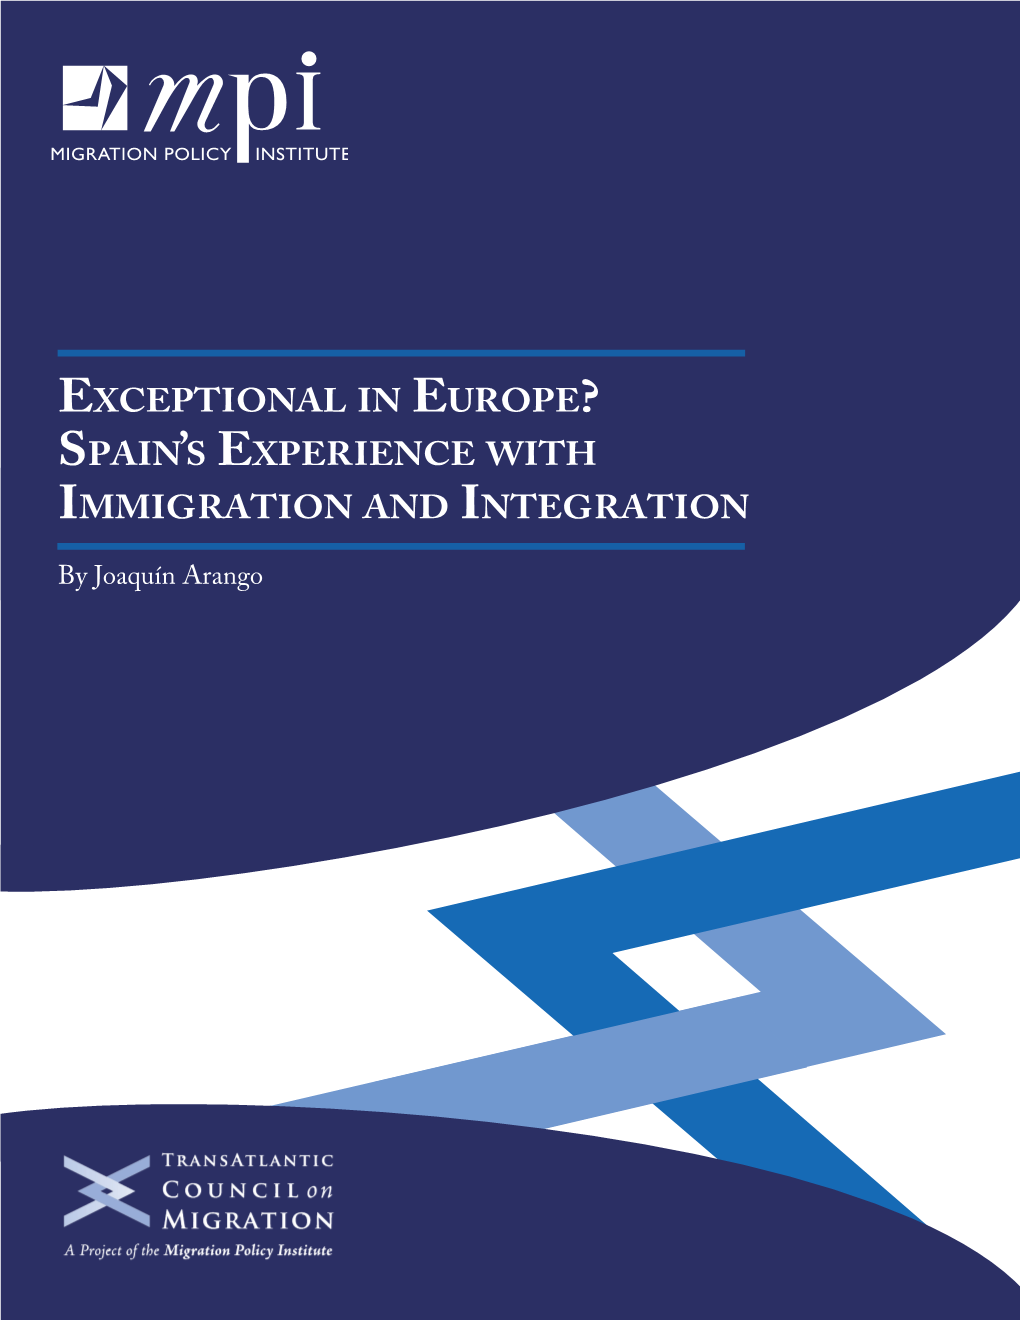 Spain's Experience with Immigration and Integration